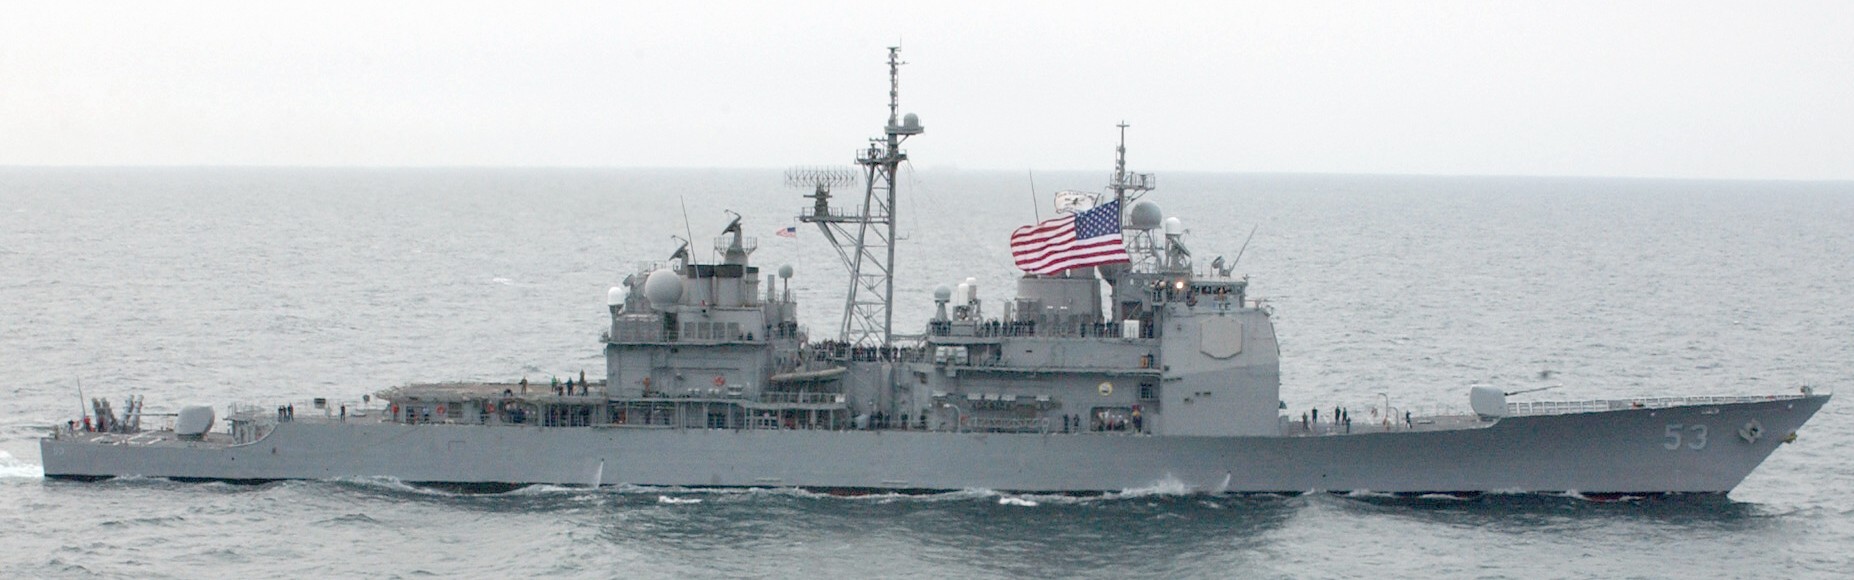 cg-53 uss mobile bay ticonderoga class guided missile cruiser aegis us navy 26